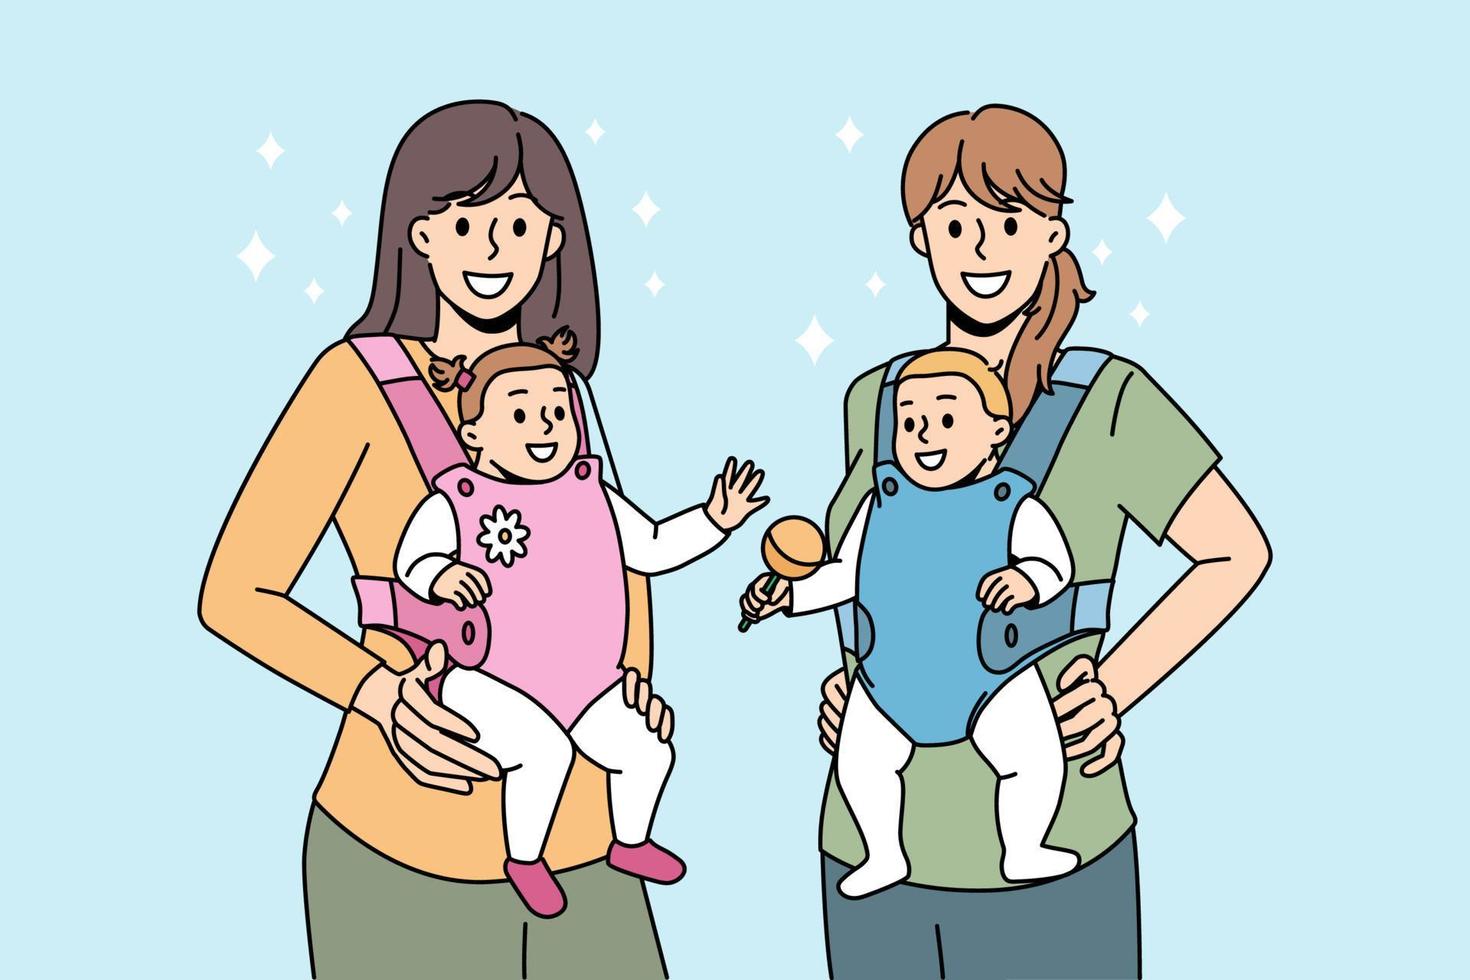 Modern mothers carrying equipment concept. Two young positive women mothers standing holding their babies in slings for outdoor walks vector illustration